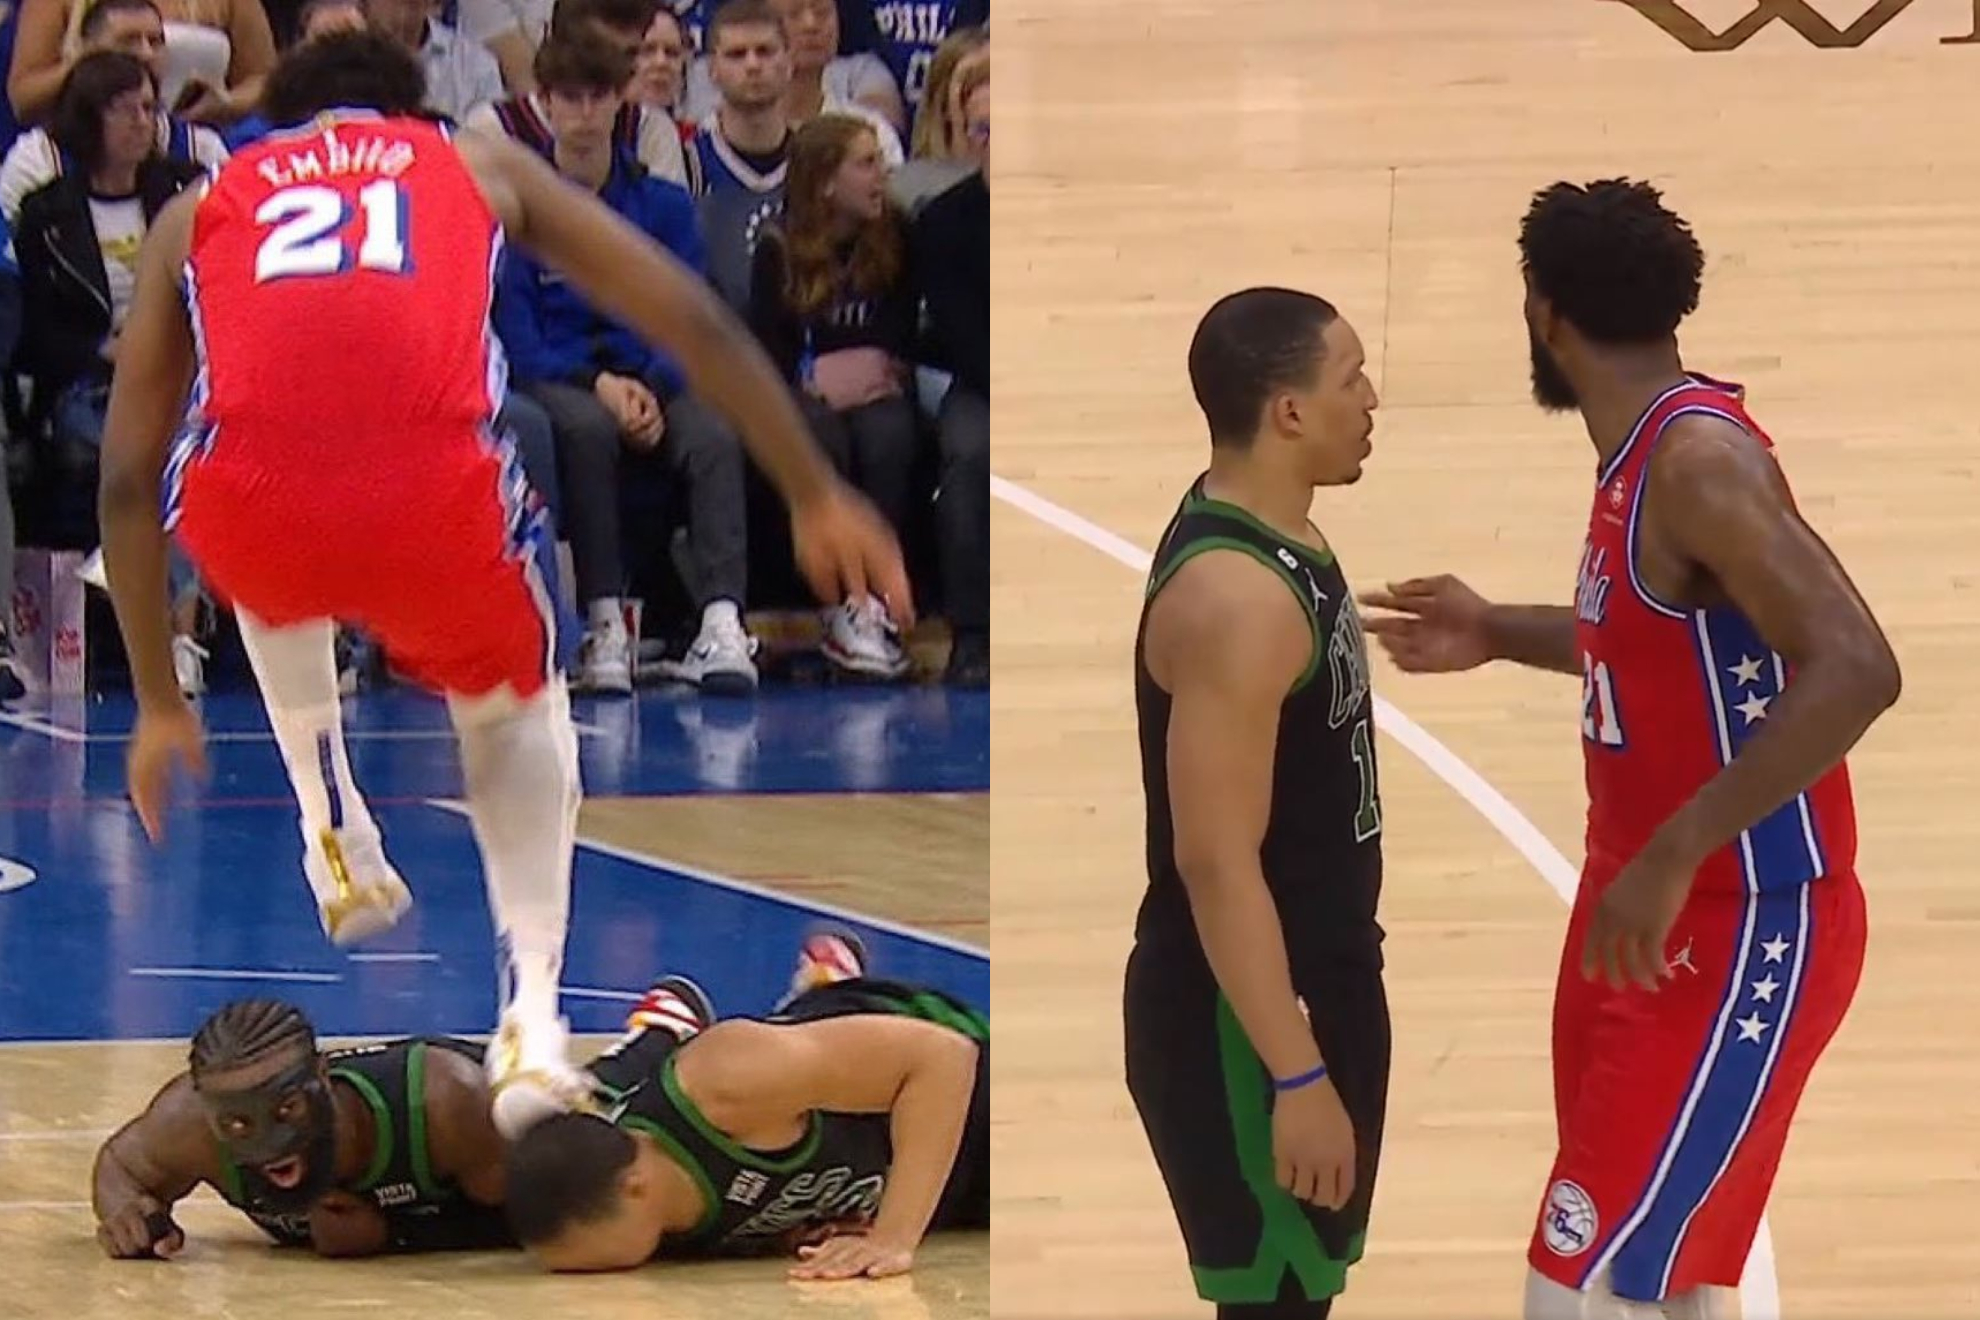 Williams recovers from accidental head stomp and accepts Embiid apology